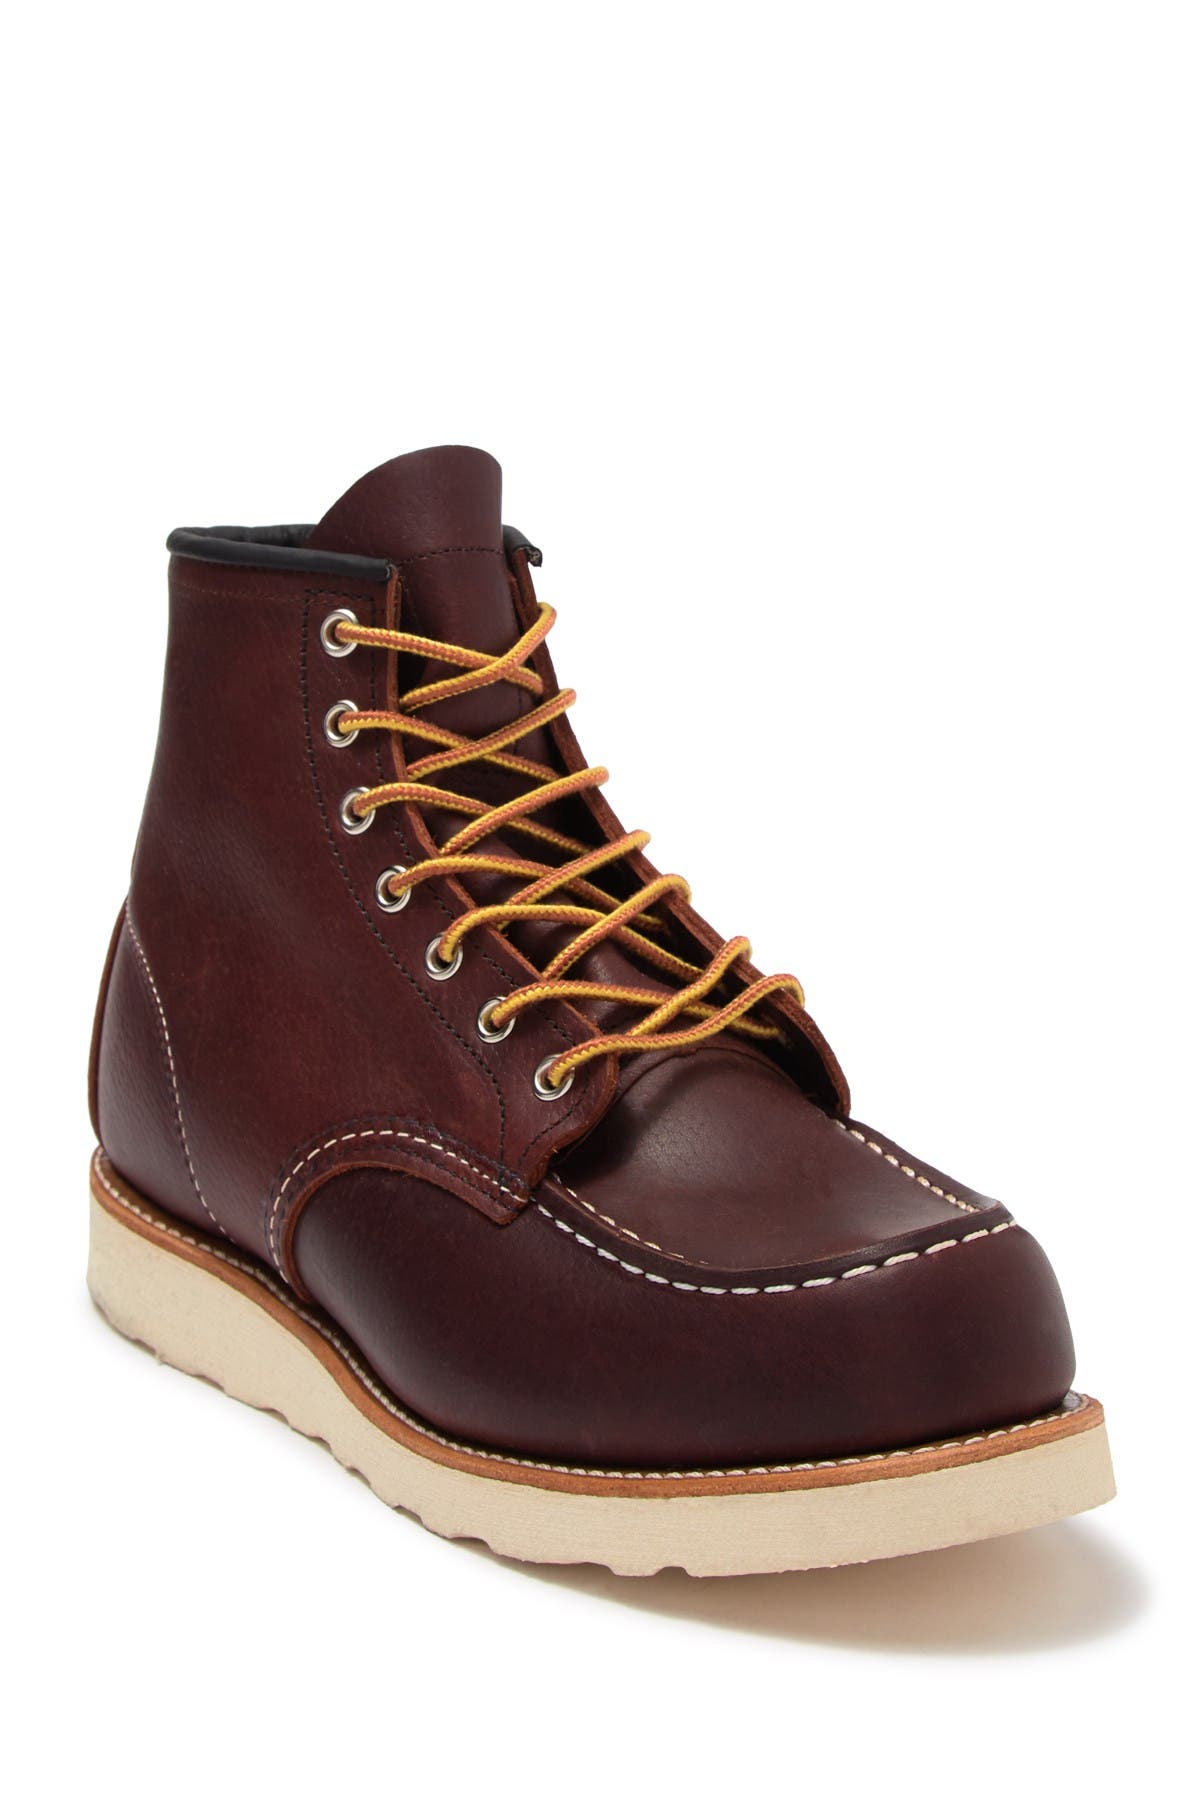 red wing work boots factory seconds